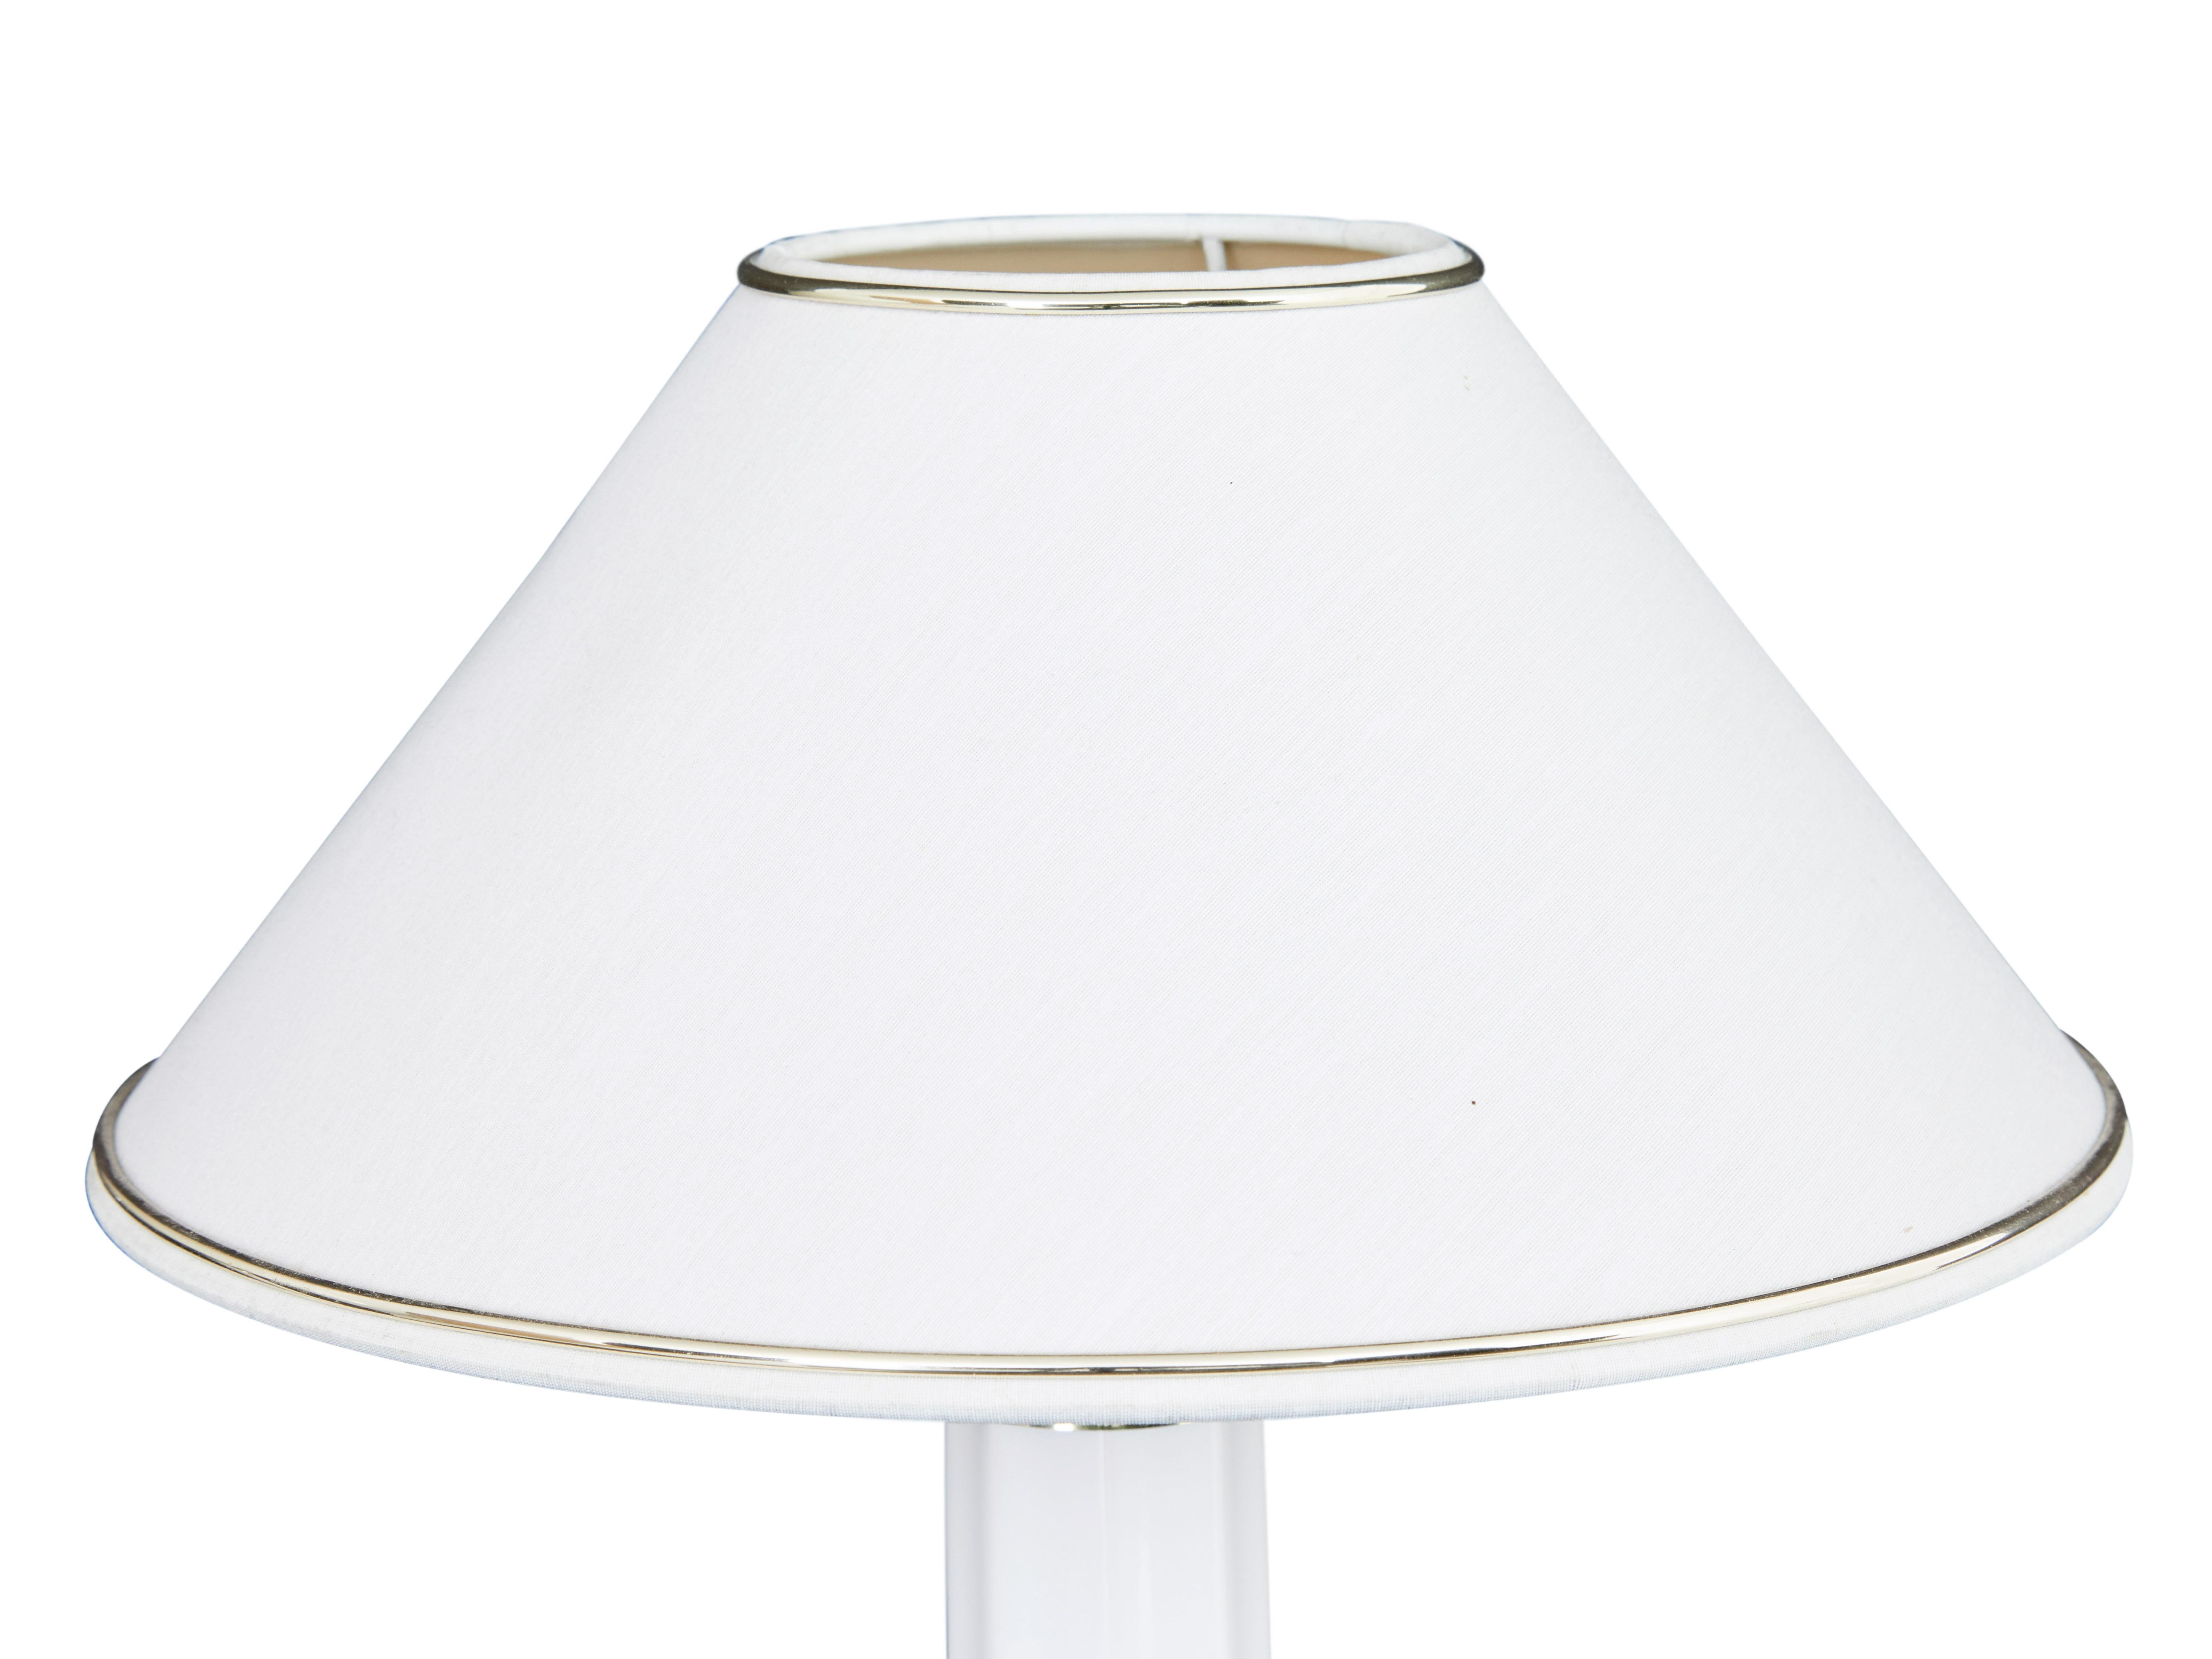 Pair of Danish Heiberg white ceramic table lamps by Soholm.

Good quality pair of table lamps of the well known 'Heiberg' model, made by Soholm of Denmark. Fluted column and base with decorative brass collars, complete with original shades with